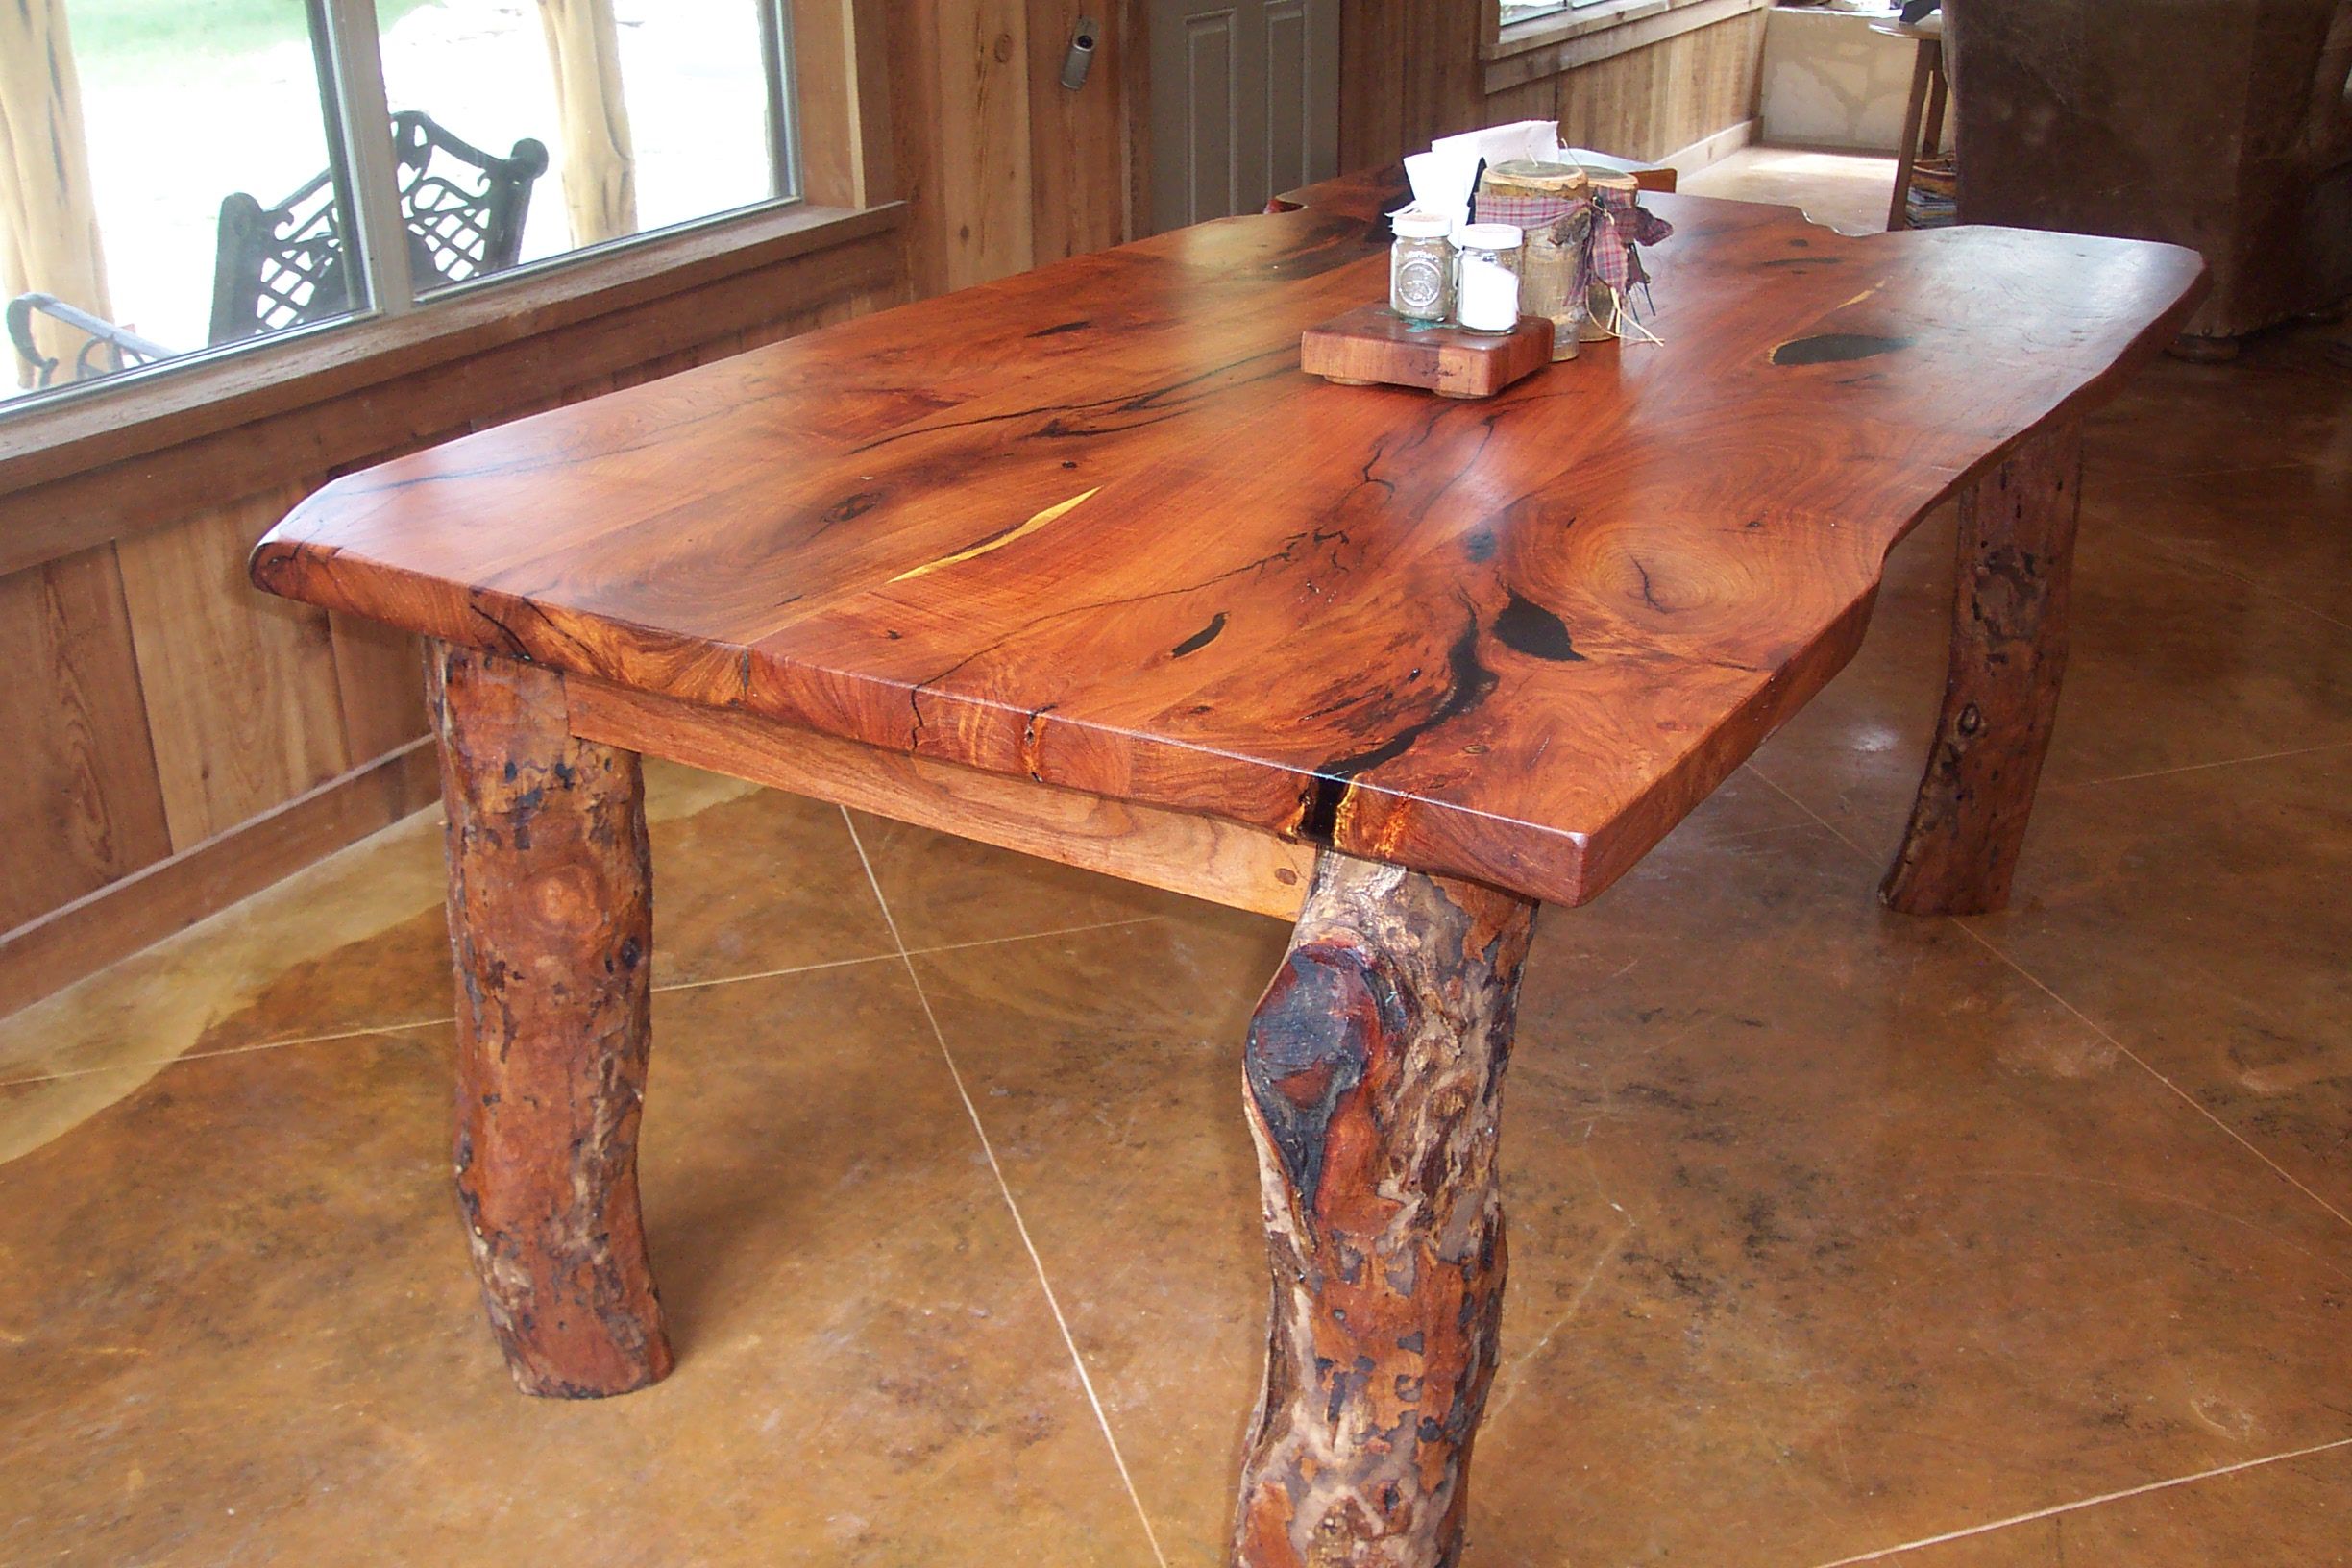 mesquite wood kitchen table